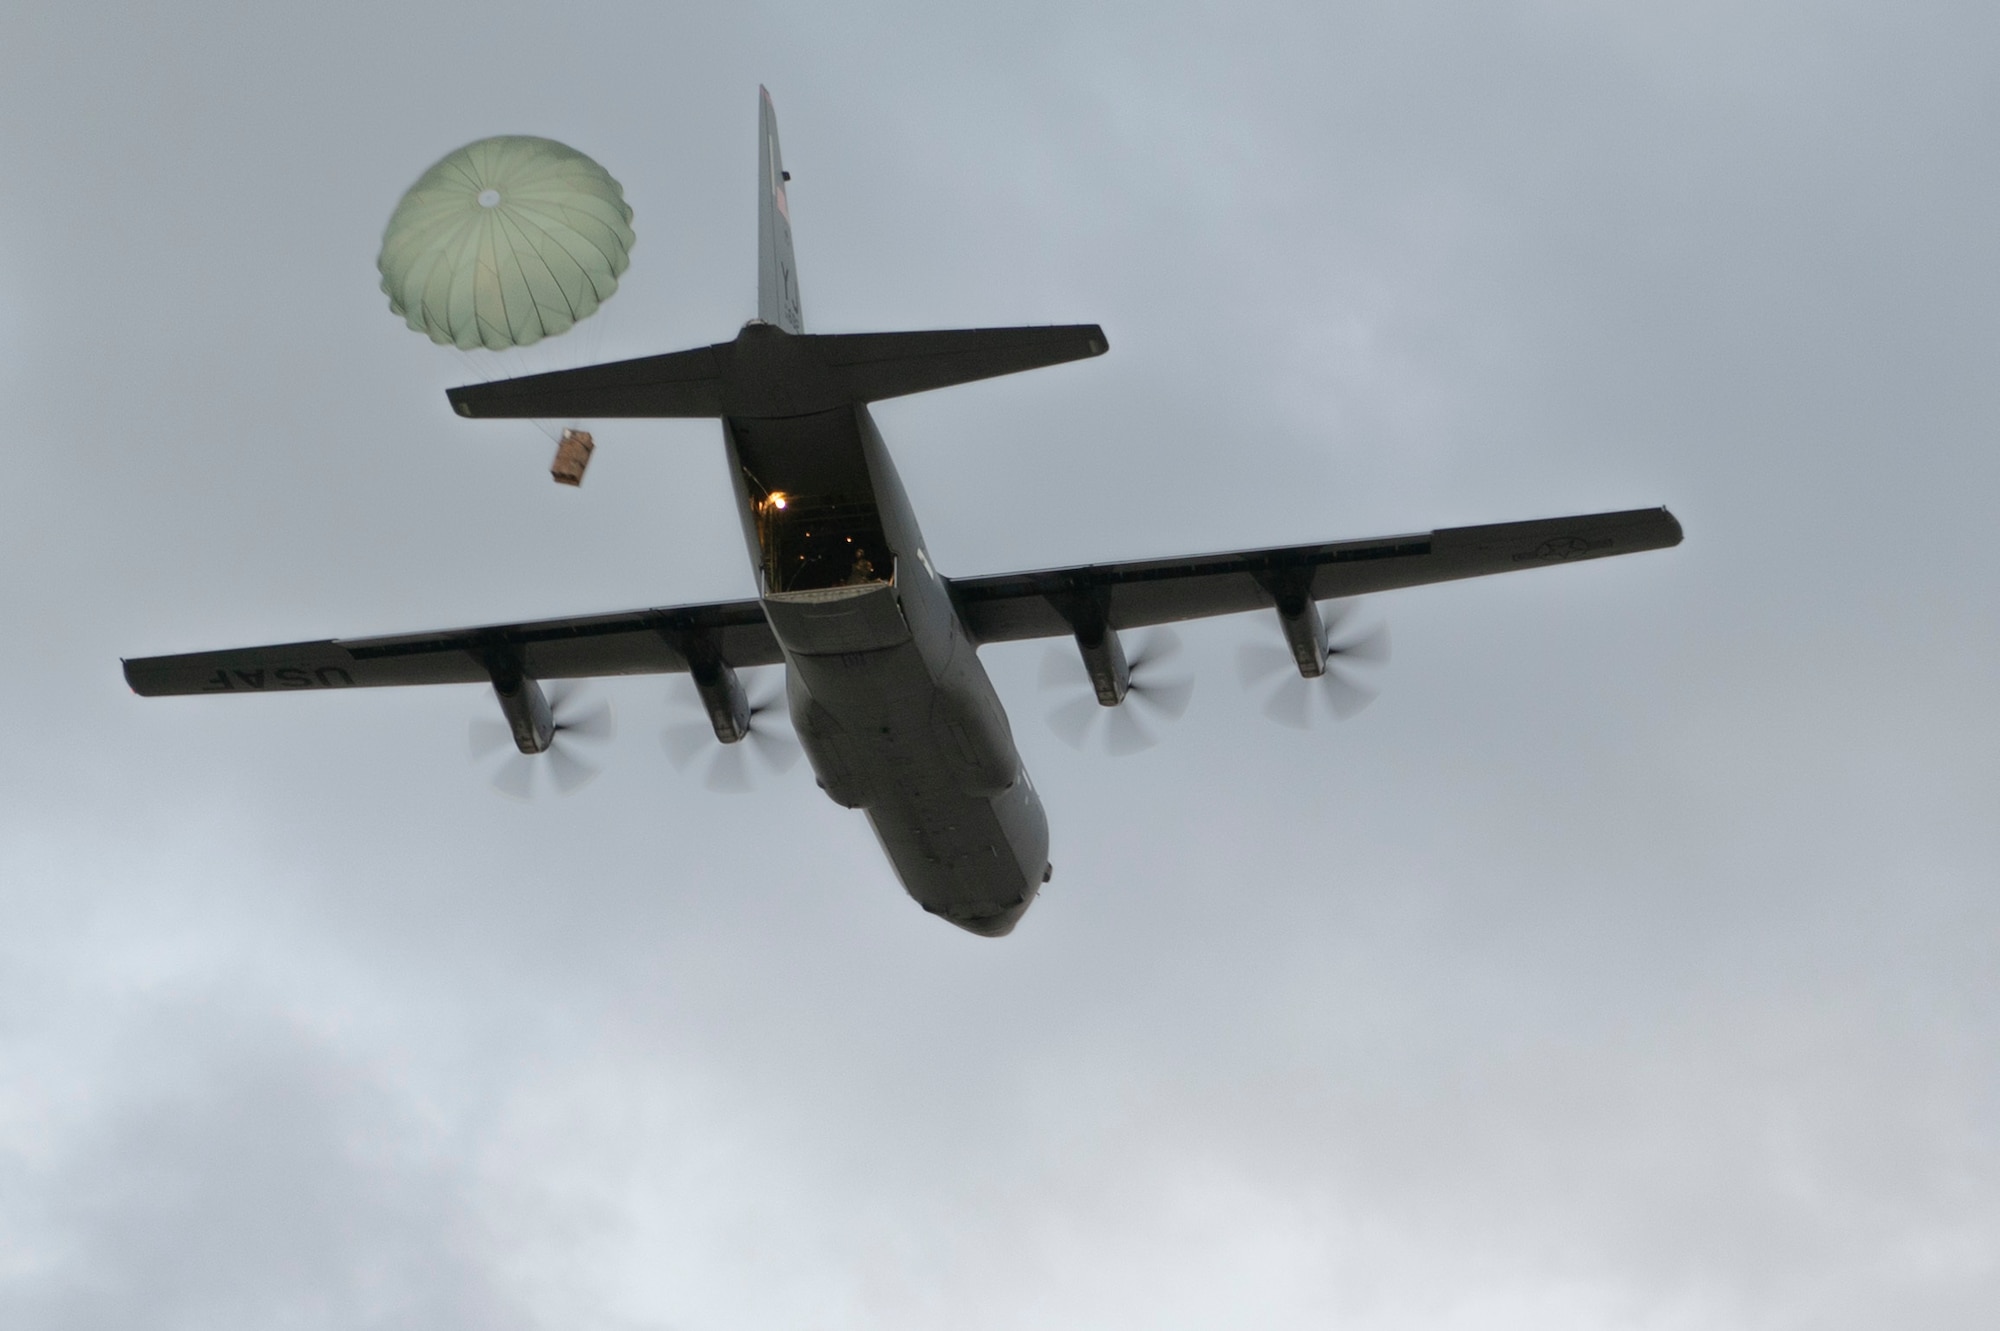 A U.S. Air Force C-130J Super Hercules makes an airdrop as a part of a training exercise over Pacific Regional Training Center, Andersen Air Force Base, Guam Jan. 19, 2023. The 36th Contingency Response Squadron conducted a training exercise to set up a drop zone while the C-130J Super Hercules crew aimed to put the drops on target. (U.S. Air Force photo by Airman 1st Class Spencer Perkins)